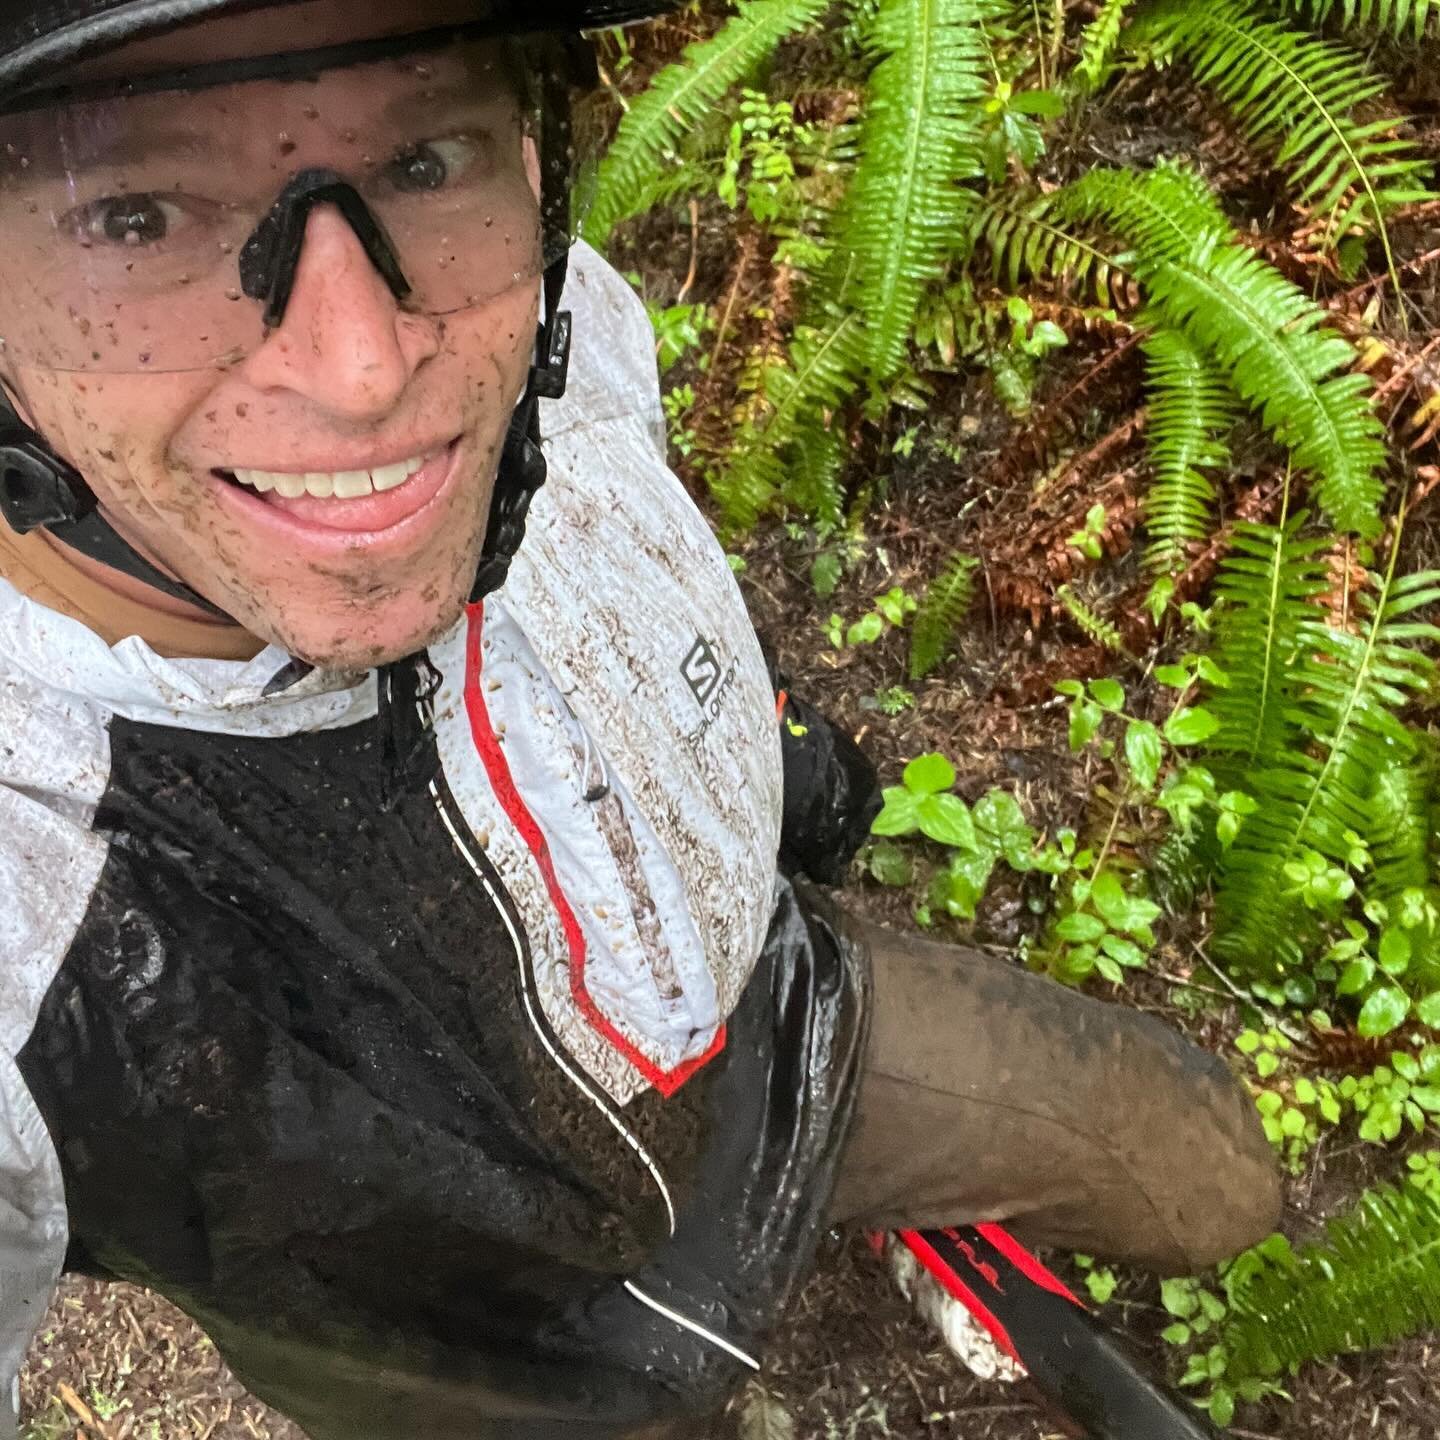 From the steeple to adventure racing! Time to get on the bike (and kayak) for the ARC (Adventure Race Croatia) next week. Nothing like cramming for the test.😜 
Had to just get it in on a rainy muddy day in the PNW.  Sometimes the hardest step is out